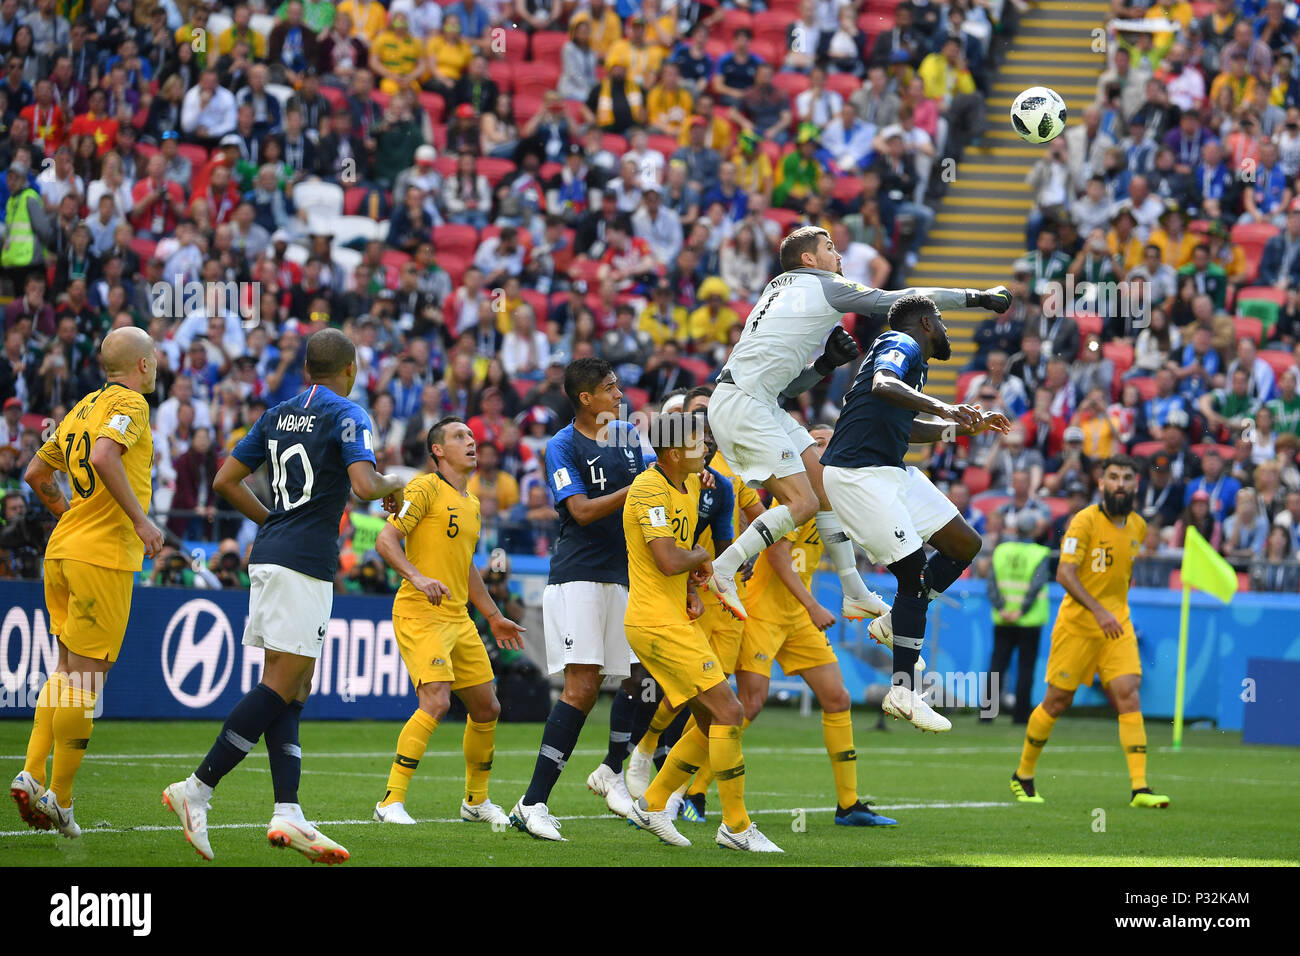 Kazan, Russia. 16th June, 2018. goalie Mathew RYAN (AUS) parries a ball, penalty area scene. France (FRA) -Australia (AUS) 2-1, Preliminary Round, Group C, Game 5, on 16.06.2018 in Kazan, Kazan Arena. Football World Cup 2018 in Russia from 14.06. - 15.07.2018. | usage worldwide Credit: dpa/Alamy Live News Stock Photo